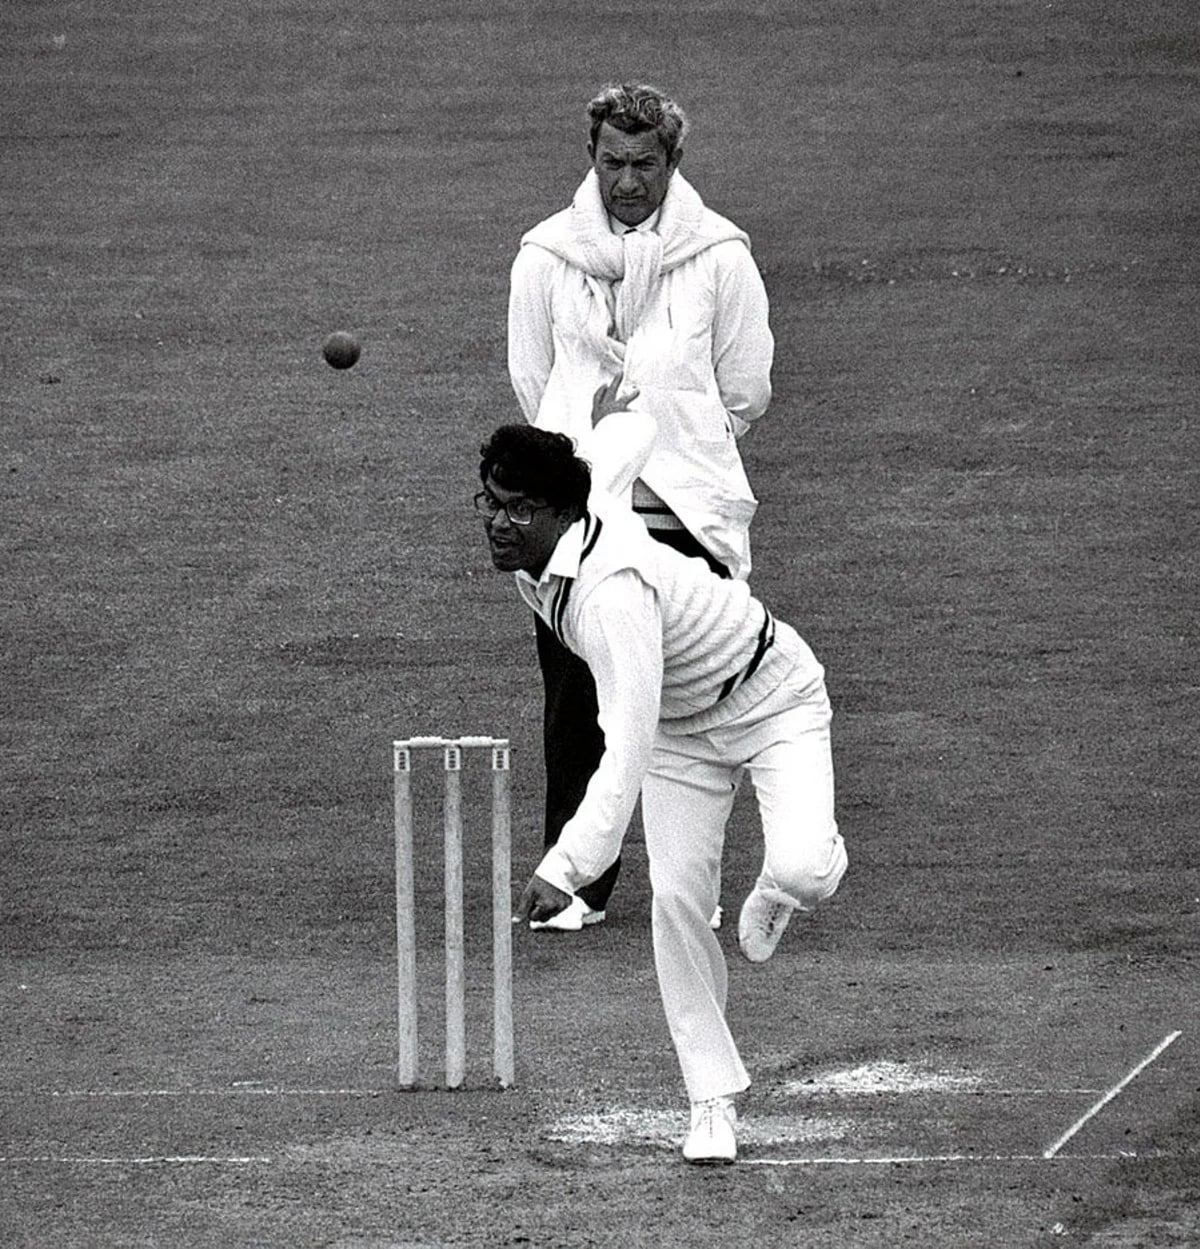 Dilip doshi story where he played important role to beat australia in melbourne in 1981